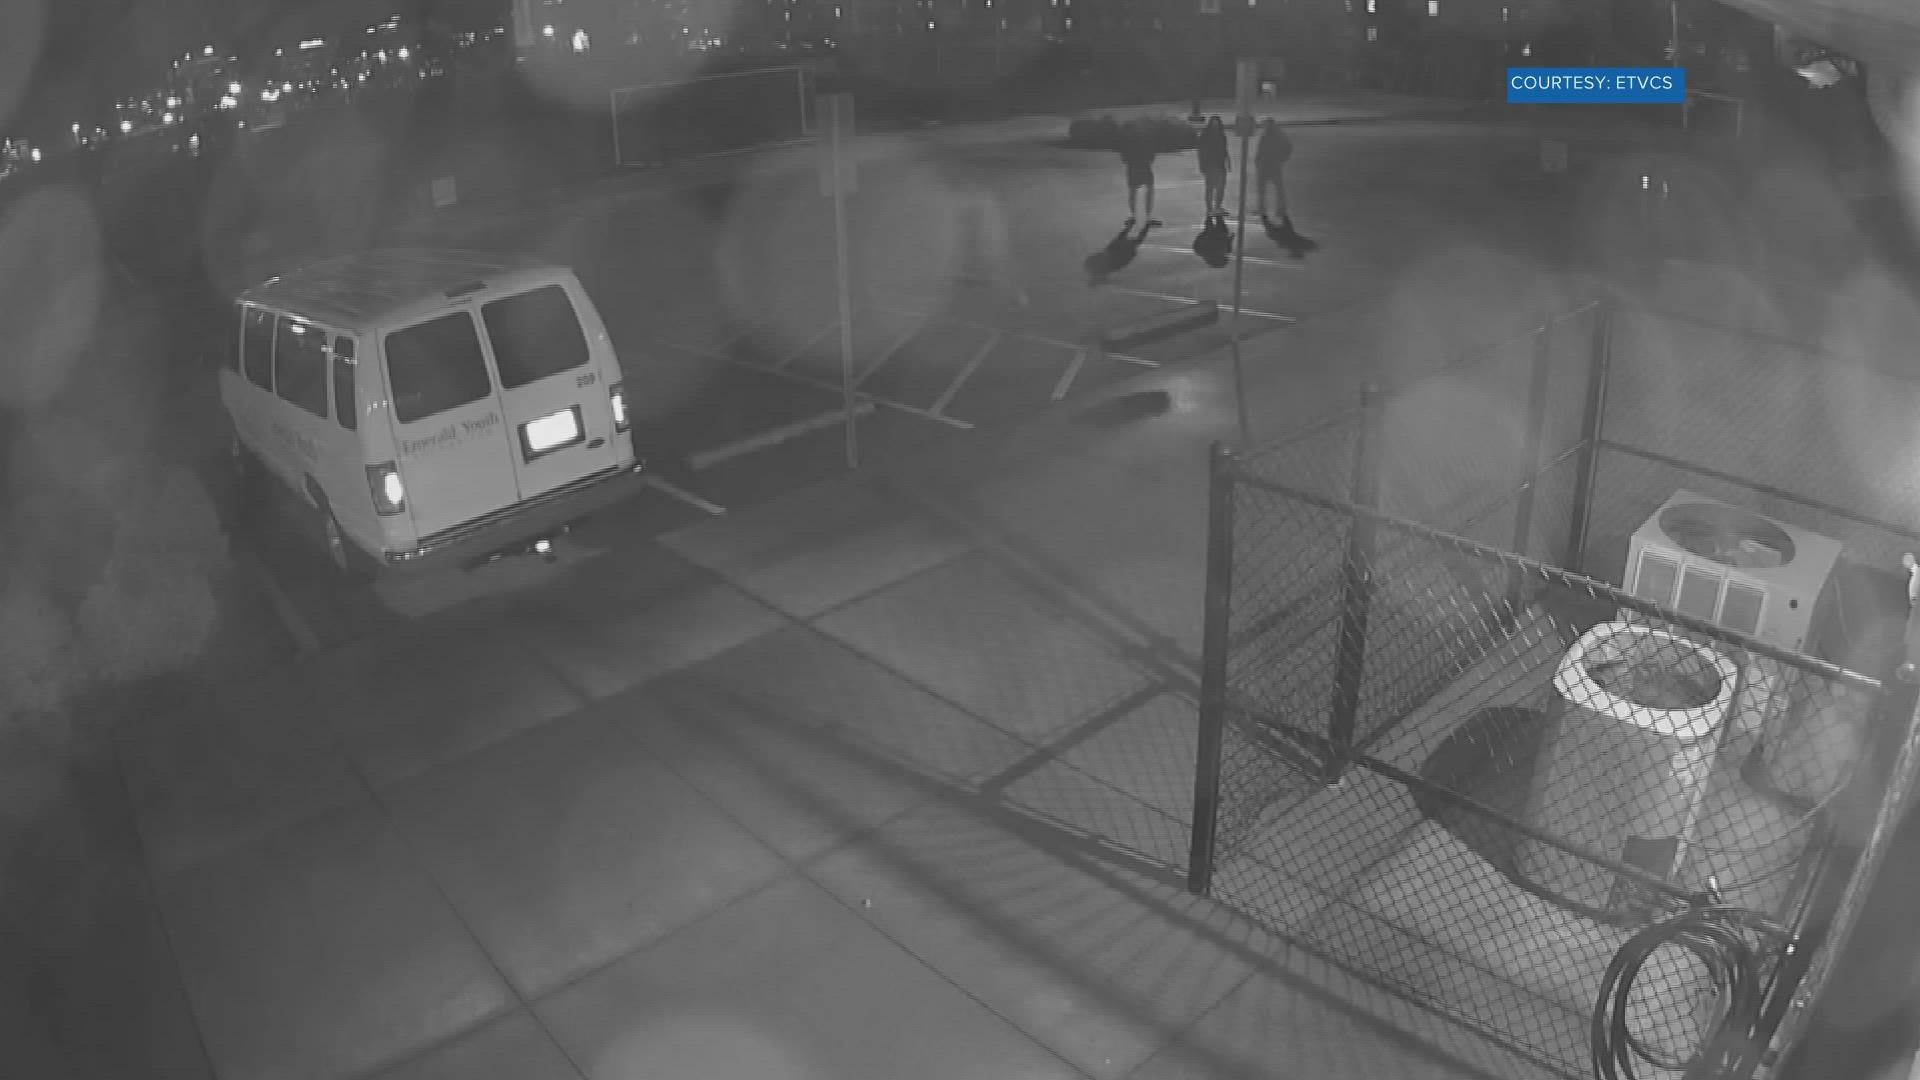 In security camera footage, a person is seen running directly into the van. They left a major dent in the van's door.